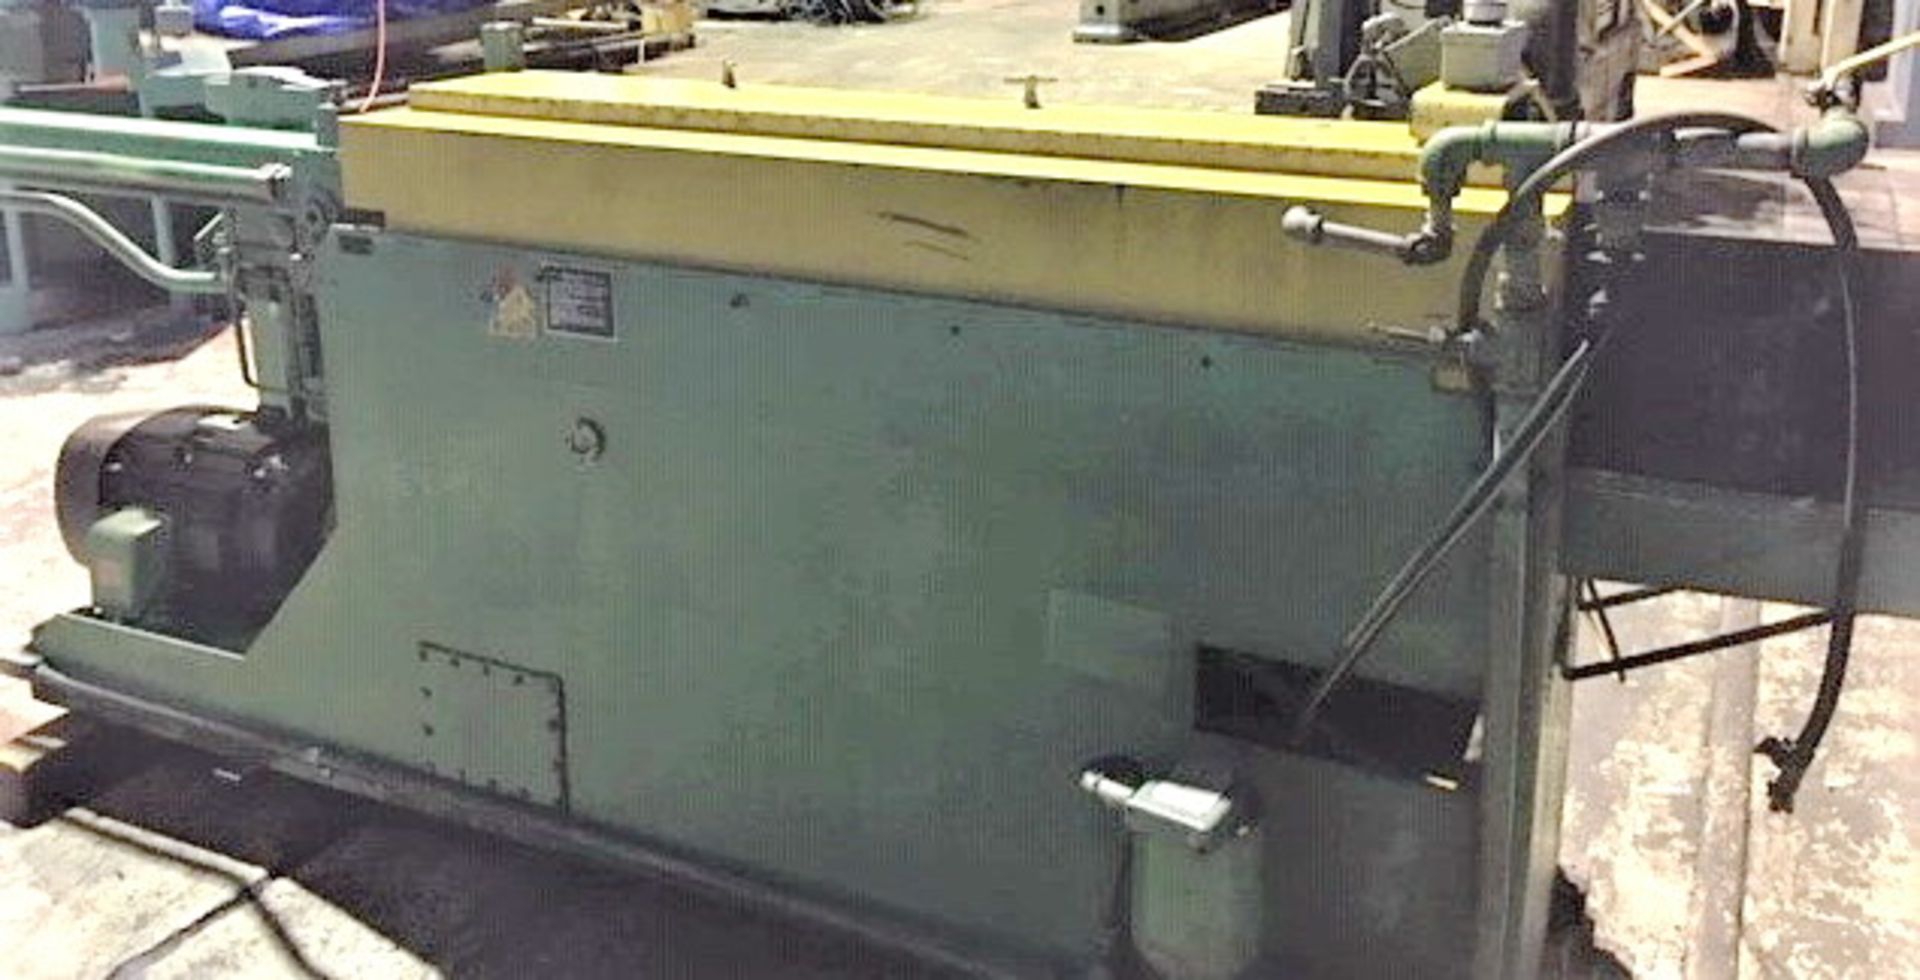 Ohio Horizontal Broaching Machine | 5 Ton x 48", Mdl: H548RR, S/N: 18125-76, Located In: - Image 4 of 15